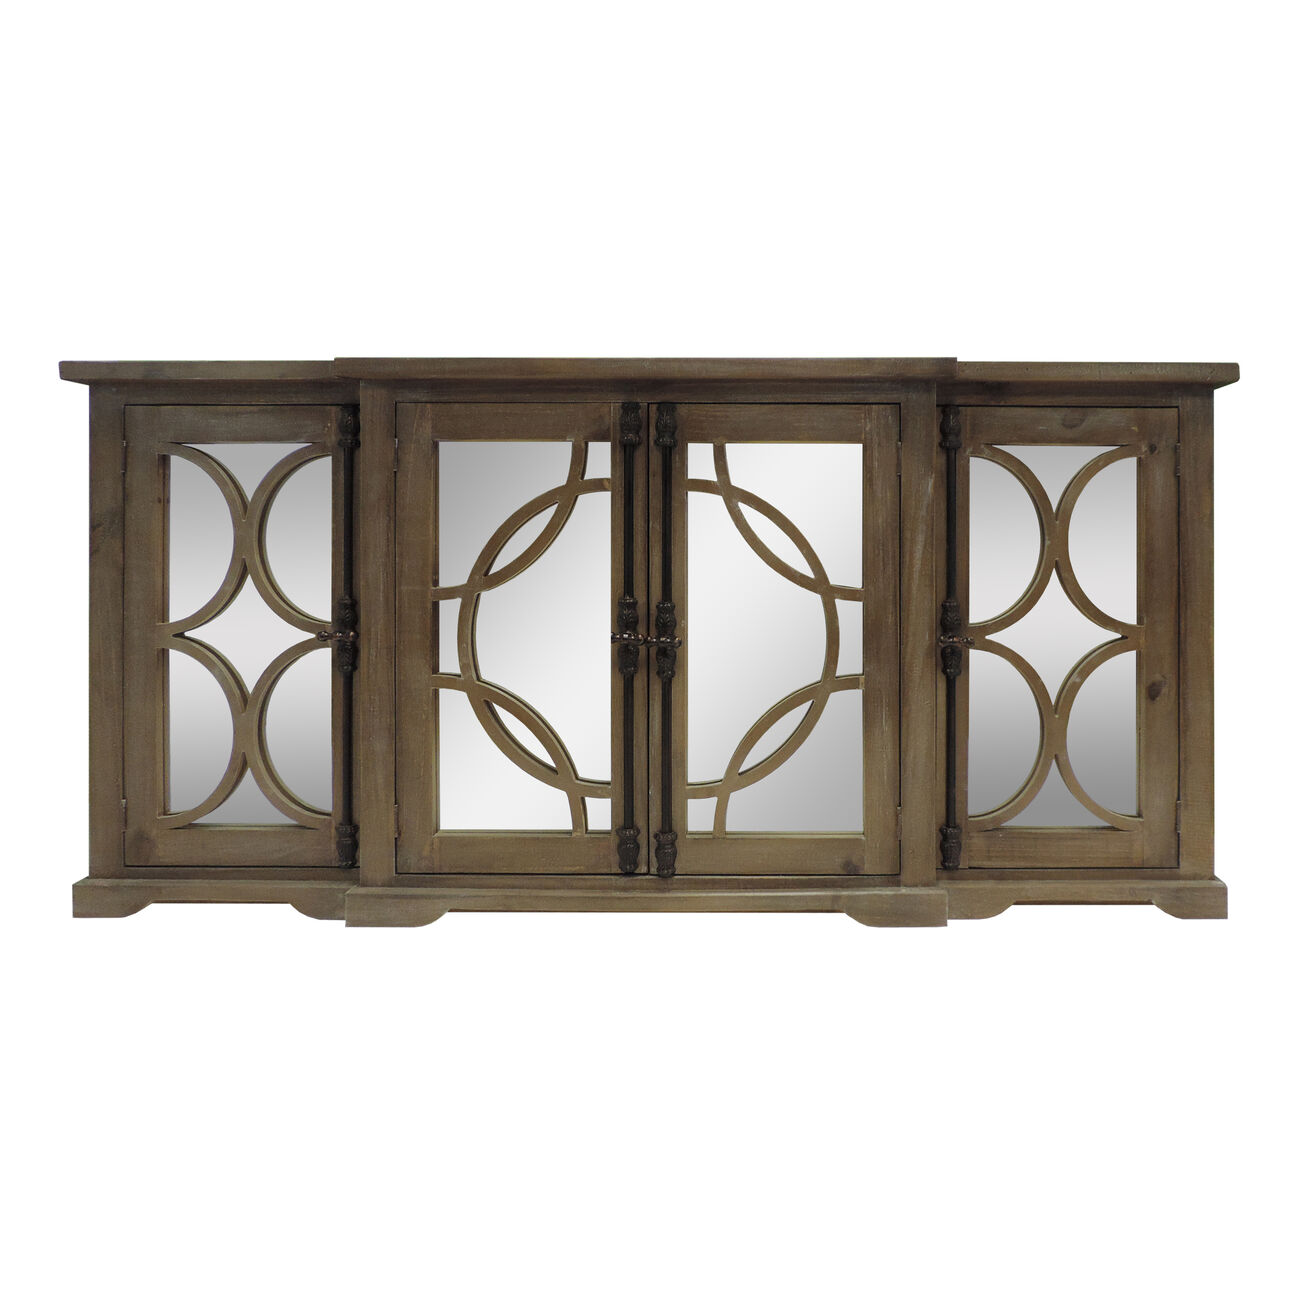 4 Door Wooden Console with Circled Design Mirrored Front, Brown